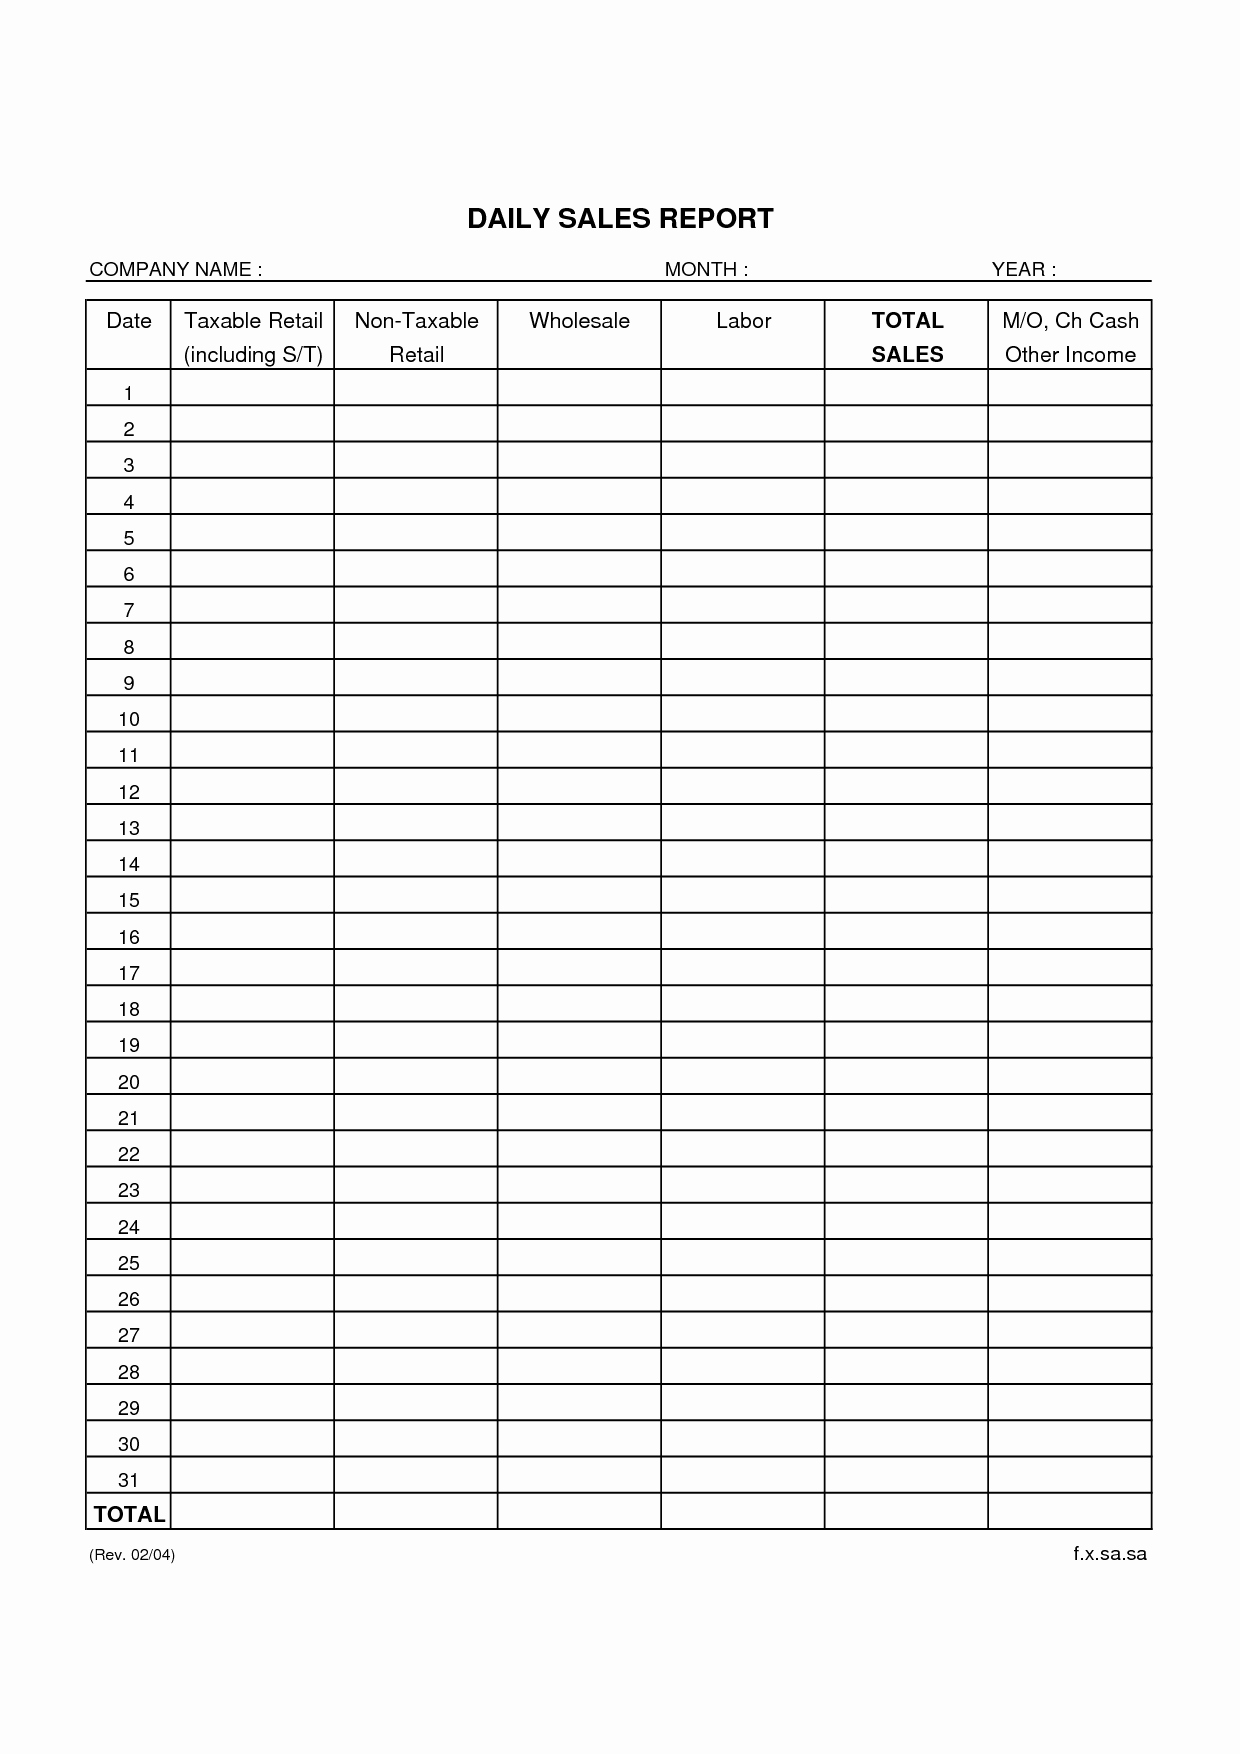 Daily Cash Report Template Beautiful Best S Of Sales Ledger Sheet Printable Blank Ledger